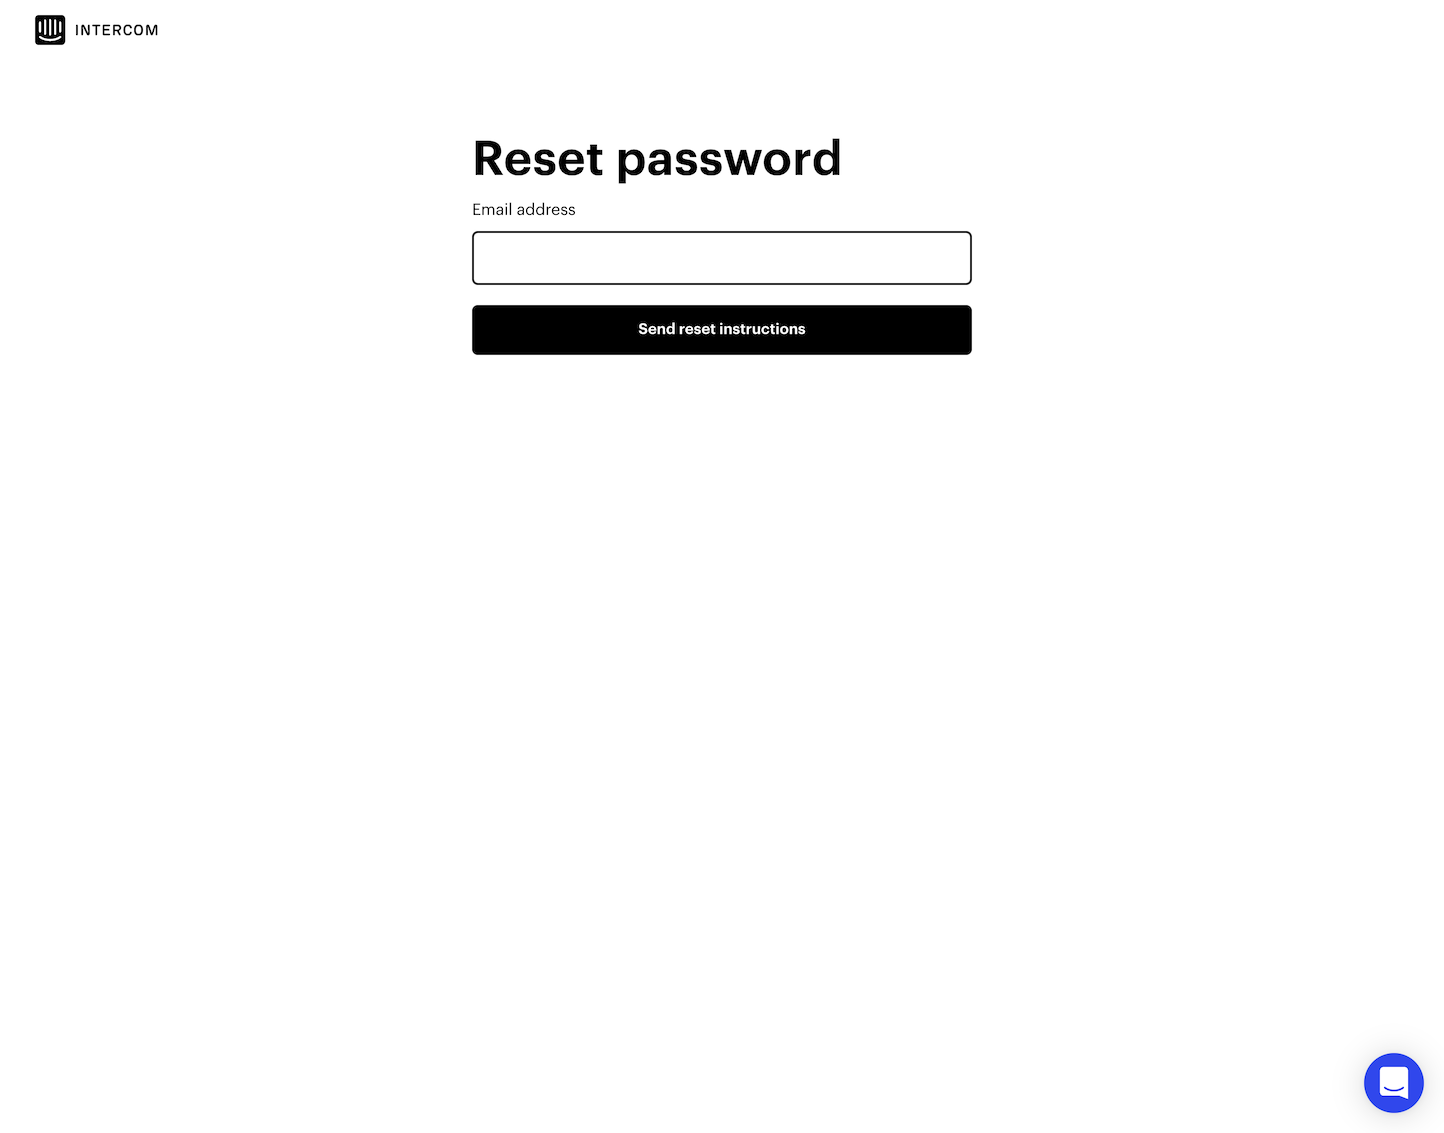 Screenshot of the Reset Password page from the Intercom website.